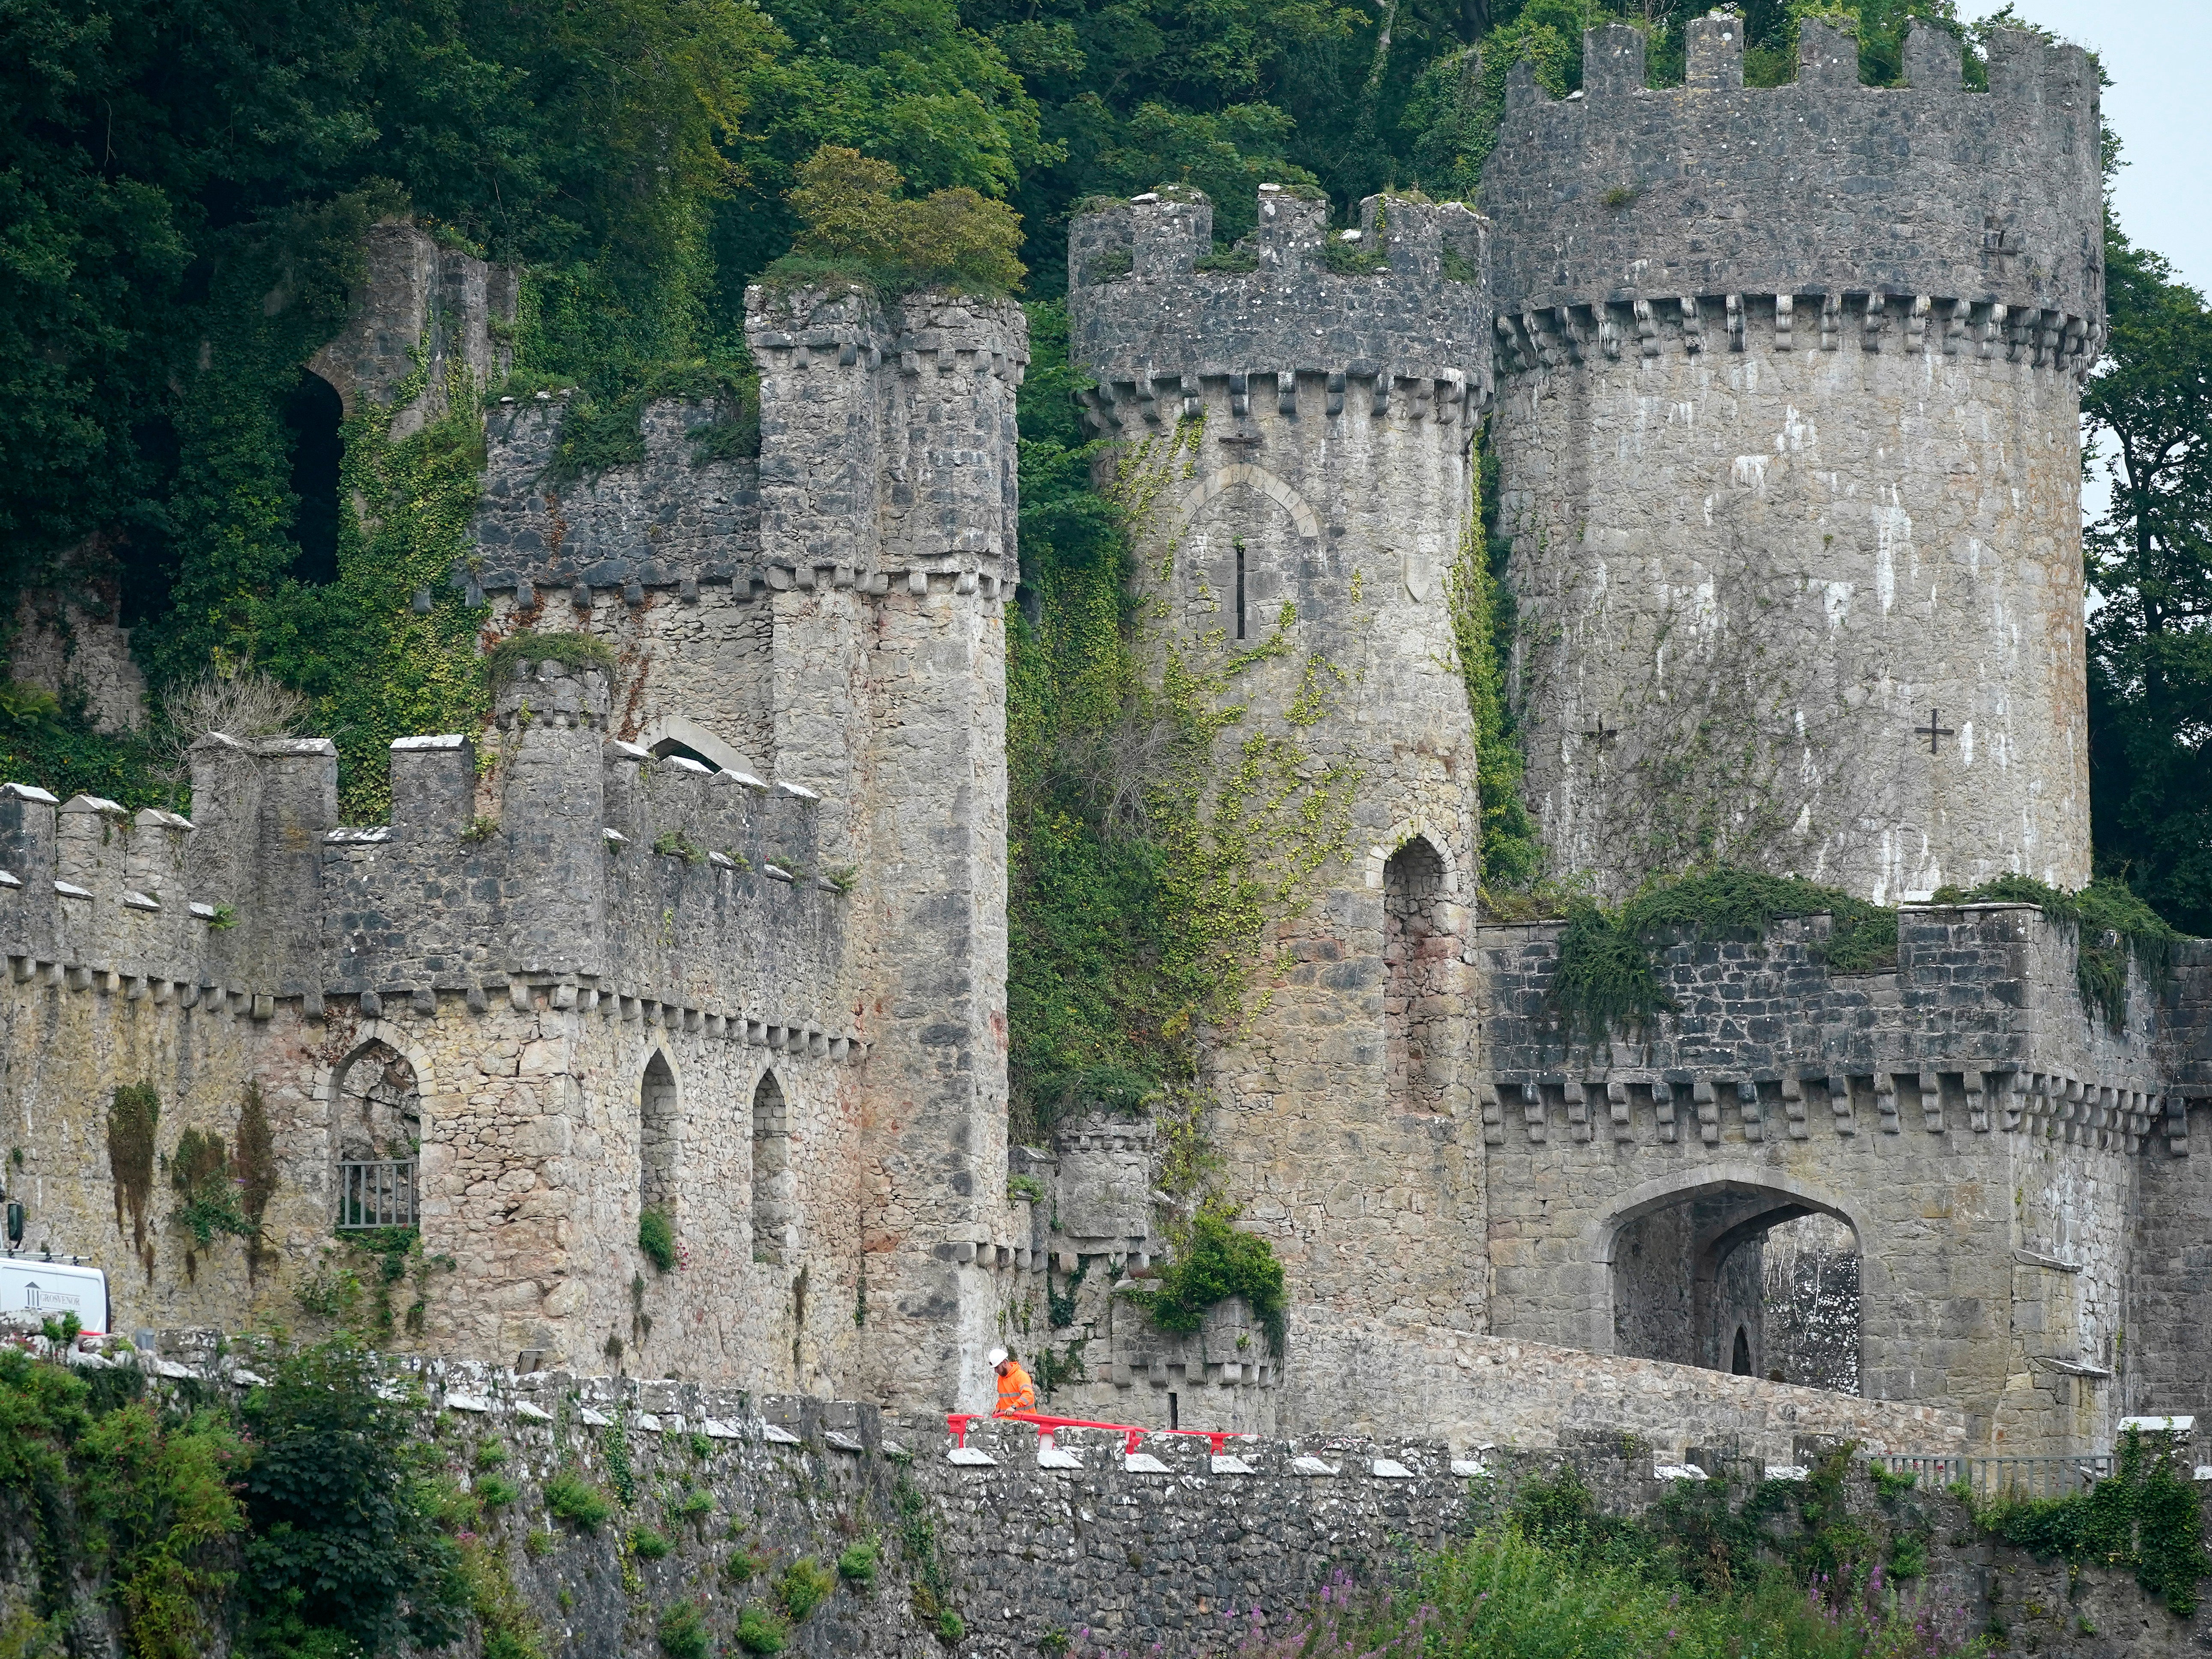 Gwrych Castle in Wales, where the 2020 edition of ‘I’m A Celebrity... Get Me Out of Here!’ was filmed